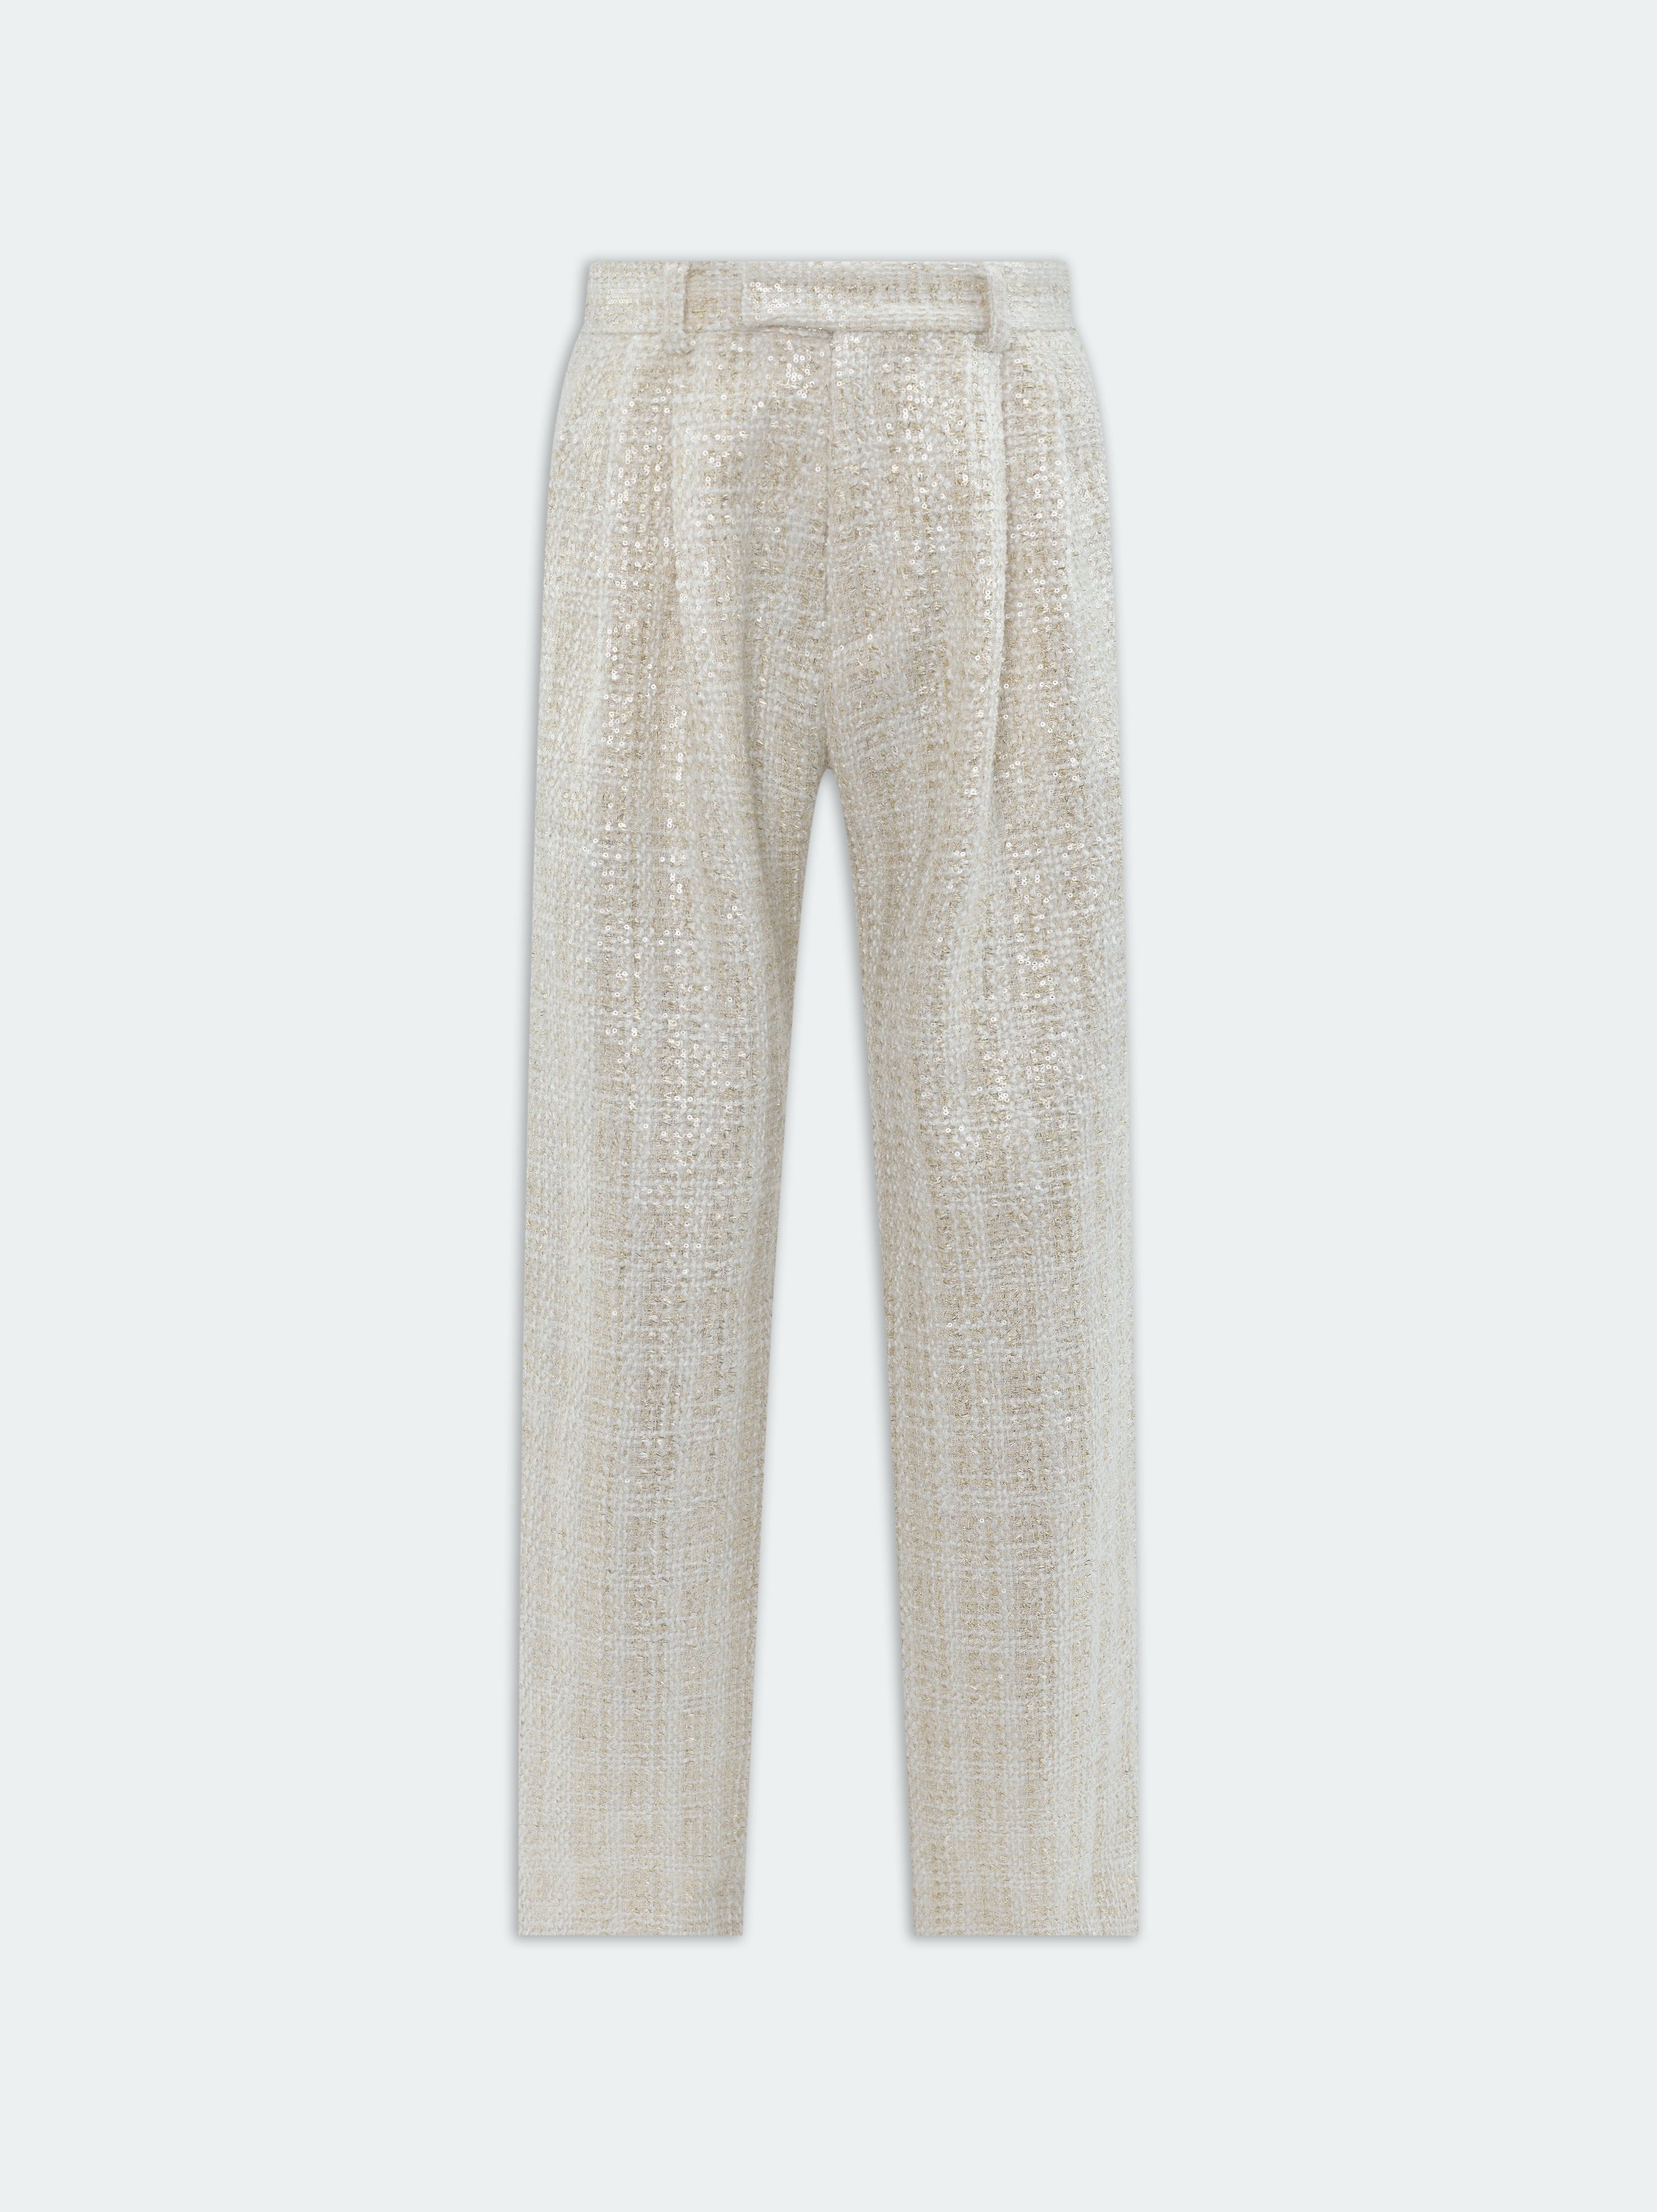 Product SEQUIN BOUCLE DOUBLE PLEATED PANT - Alabaster featured image